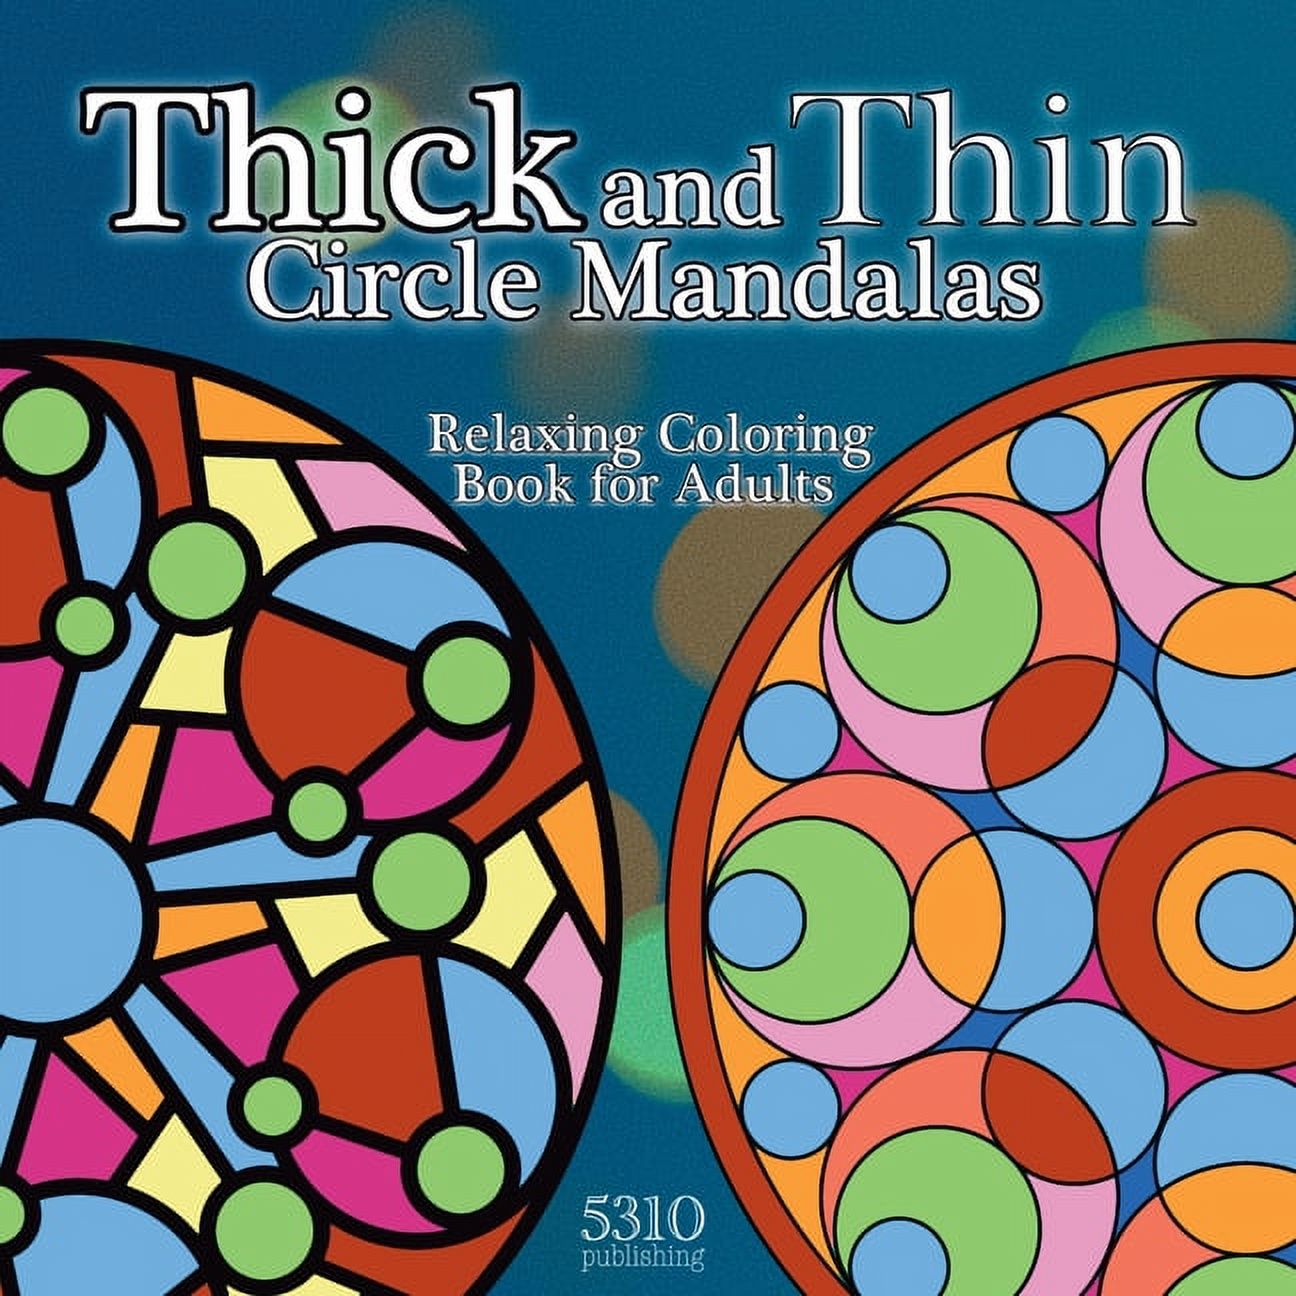 Thick and Thin Circle Mandalas: Relaxing Coloring Book for Adults [Book]